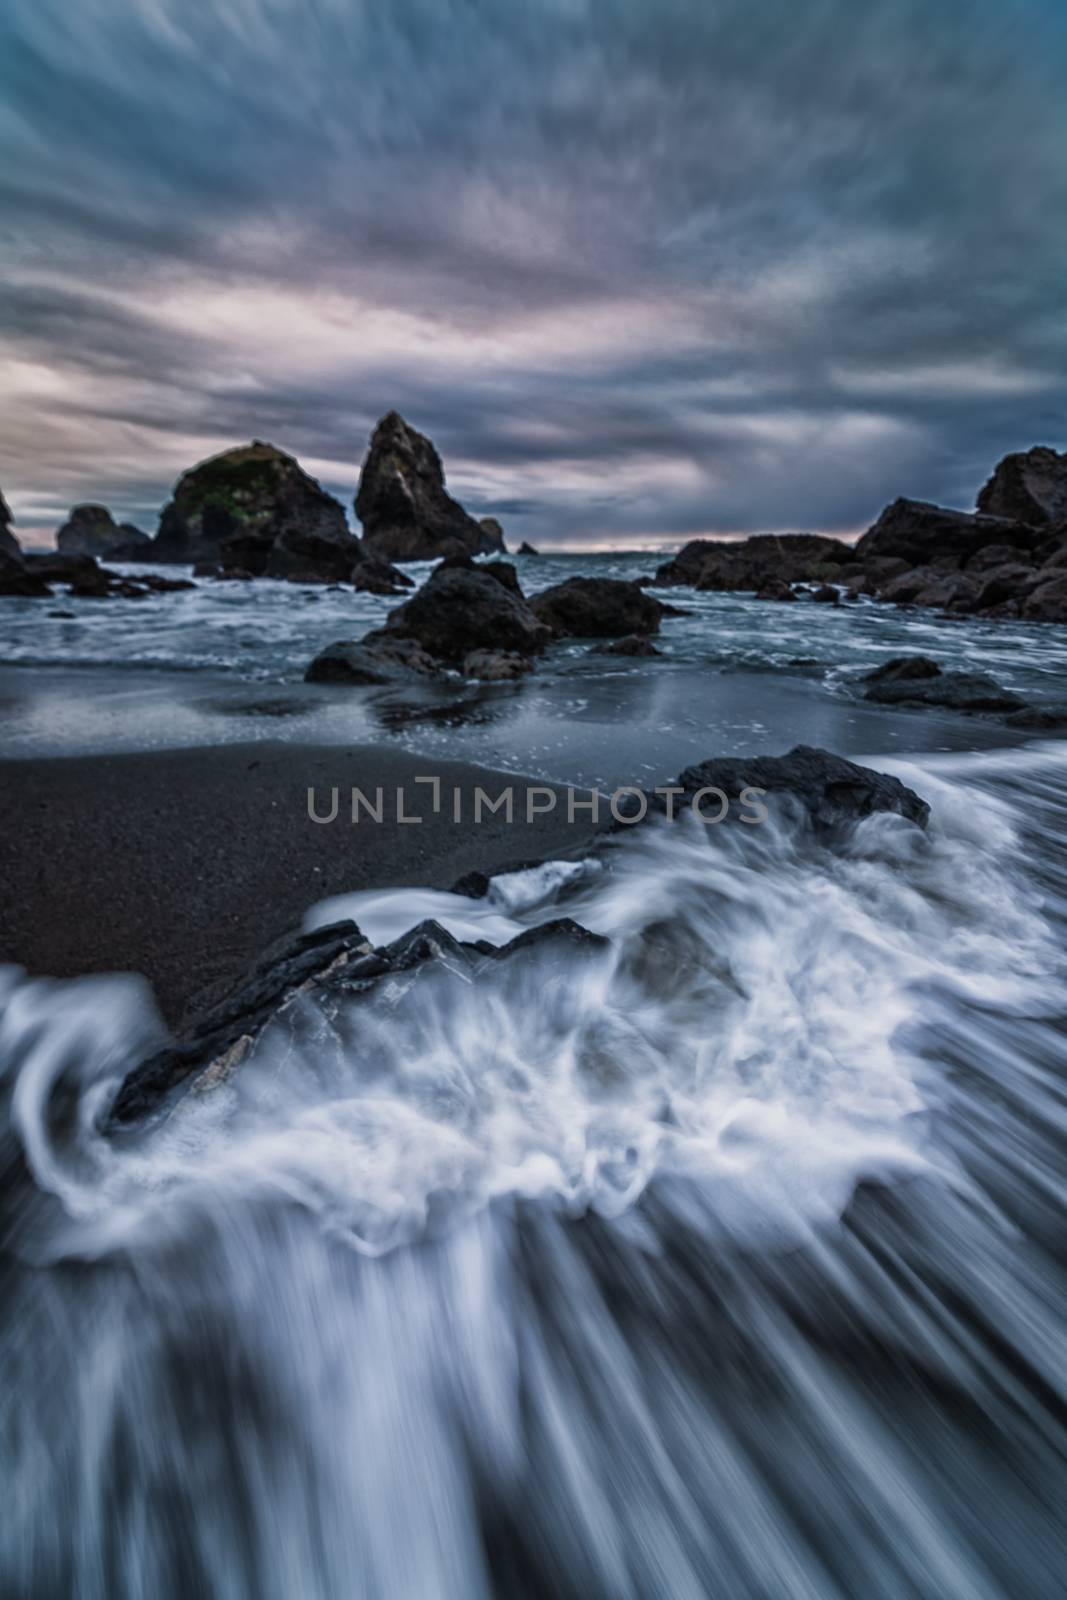 Sunset at a Rocky Northern California Beack by backyard_photography